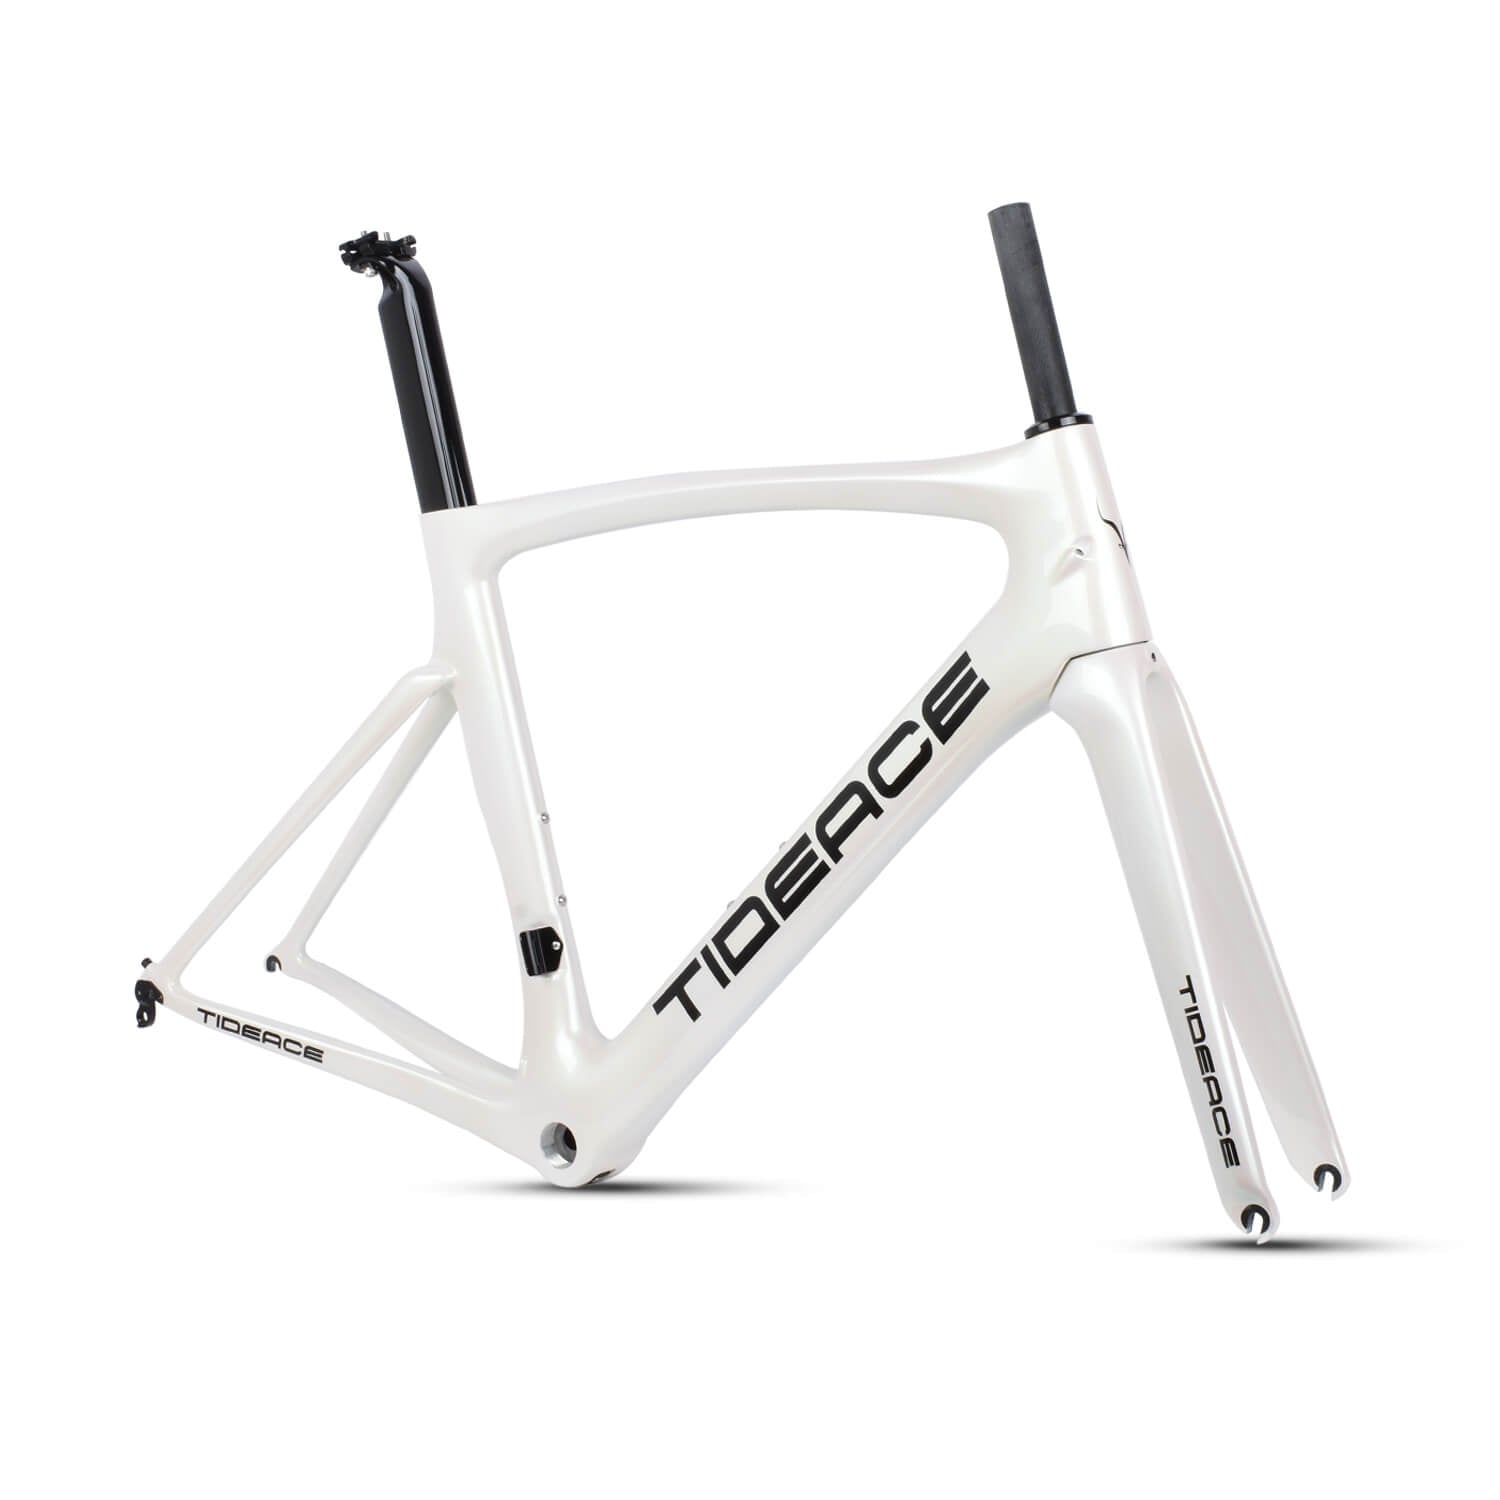 T1000 full carbon fiber cycling bicycle frames